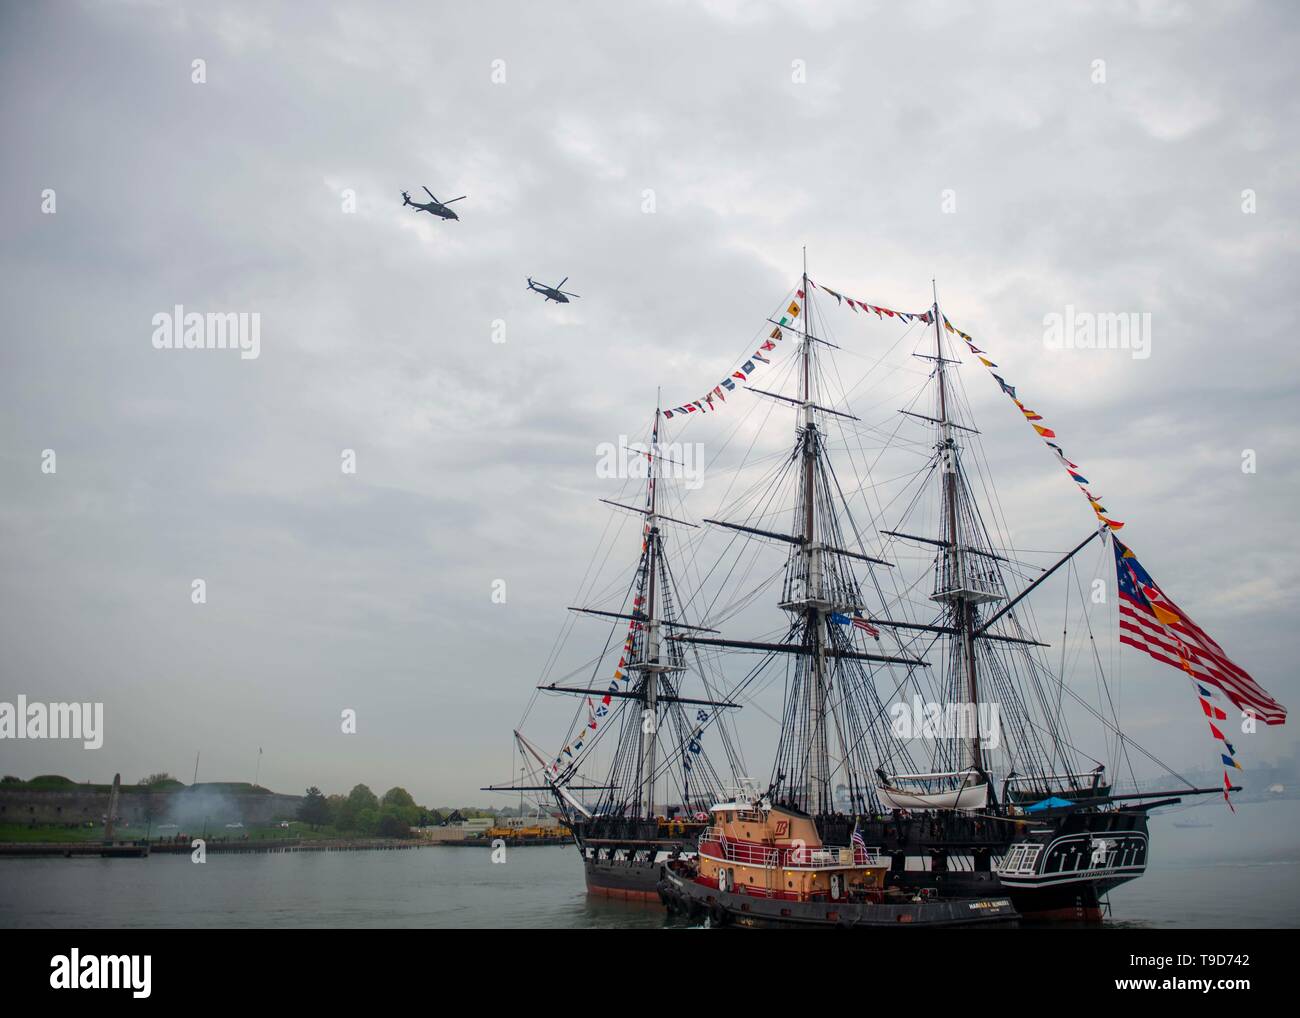 BOSTON (May 17, 2019) USS Constitution is tugged out to Fort Independence on Castle Island during ‘Old Ironsides' underway commemorating the Vietnam War. The event is in concert with the National Vietnam War Commeration, commited to highlighting the service of U.S,. Armed Forces during the Vietnam War and to thank and honor veterans and their families, and our allies. (U.S. Navy Photo by Seaman Donovan Keller/released) Stock Photo